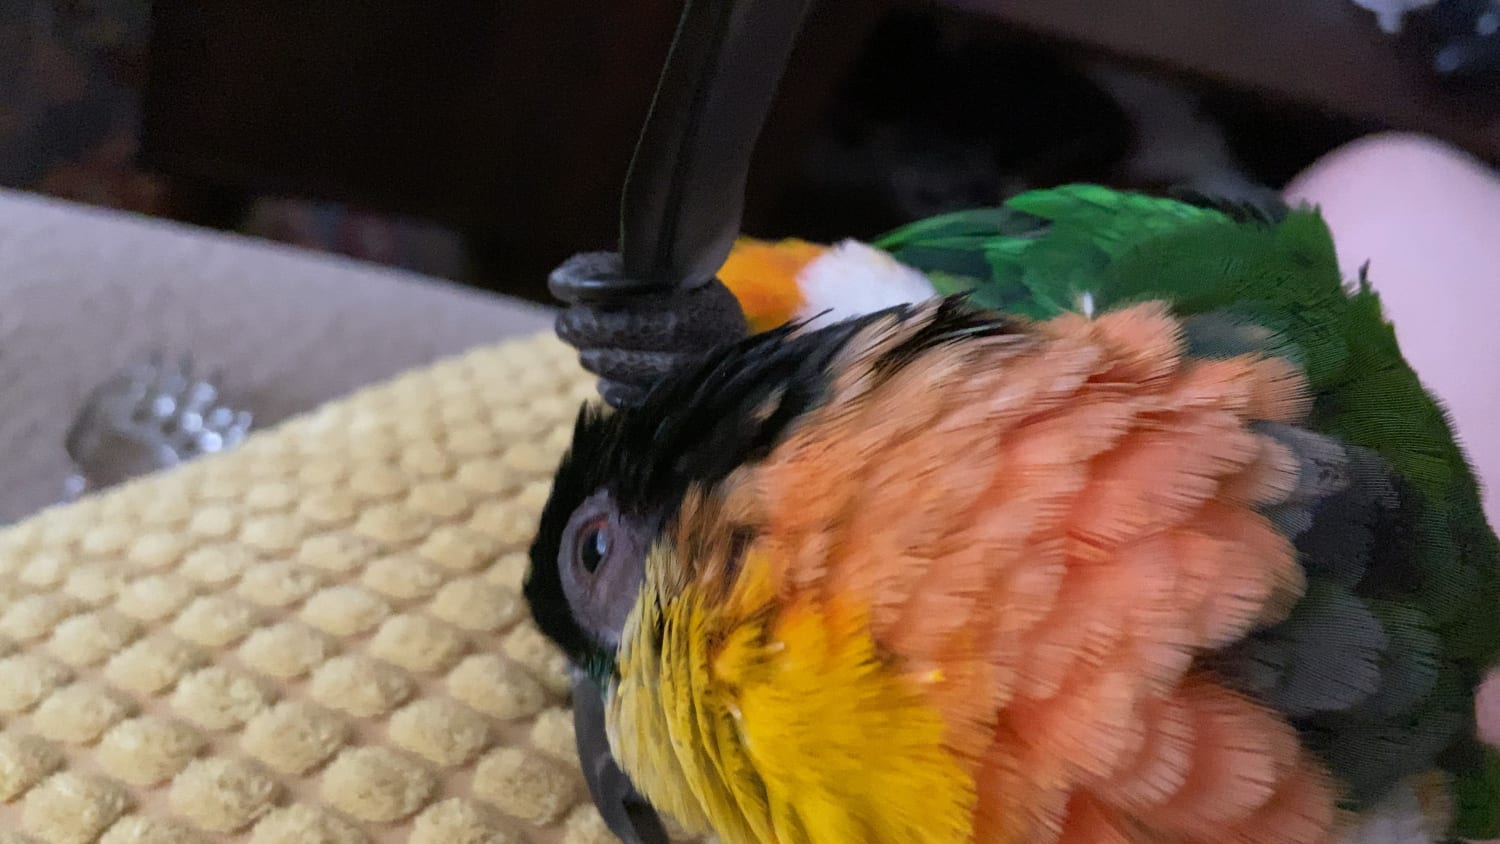 Bird uses his own feather for some satisfying head scritches :)